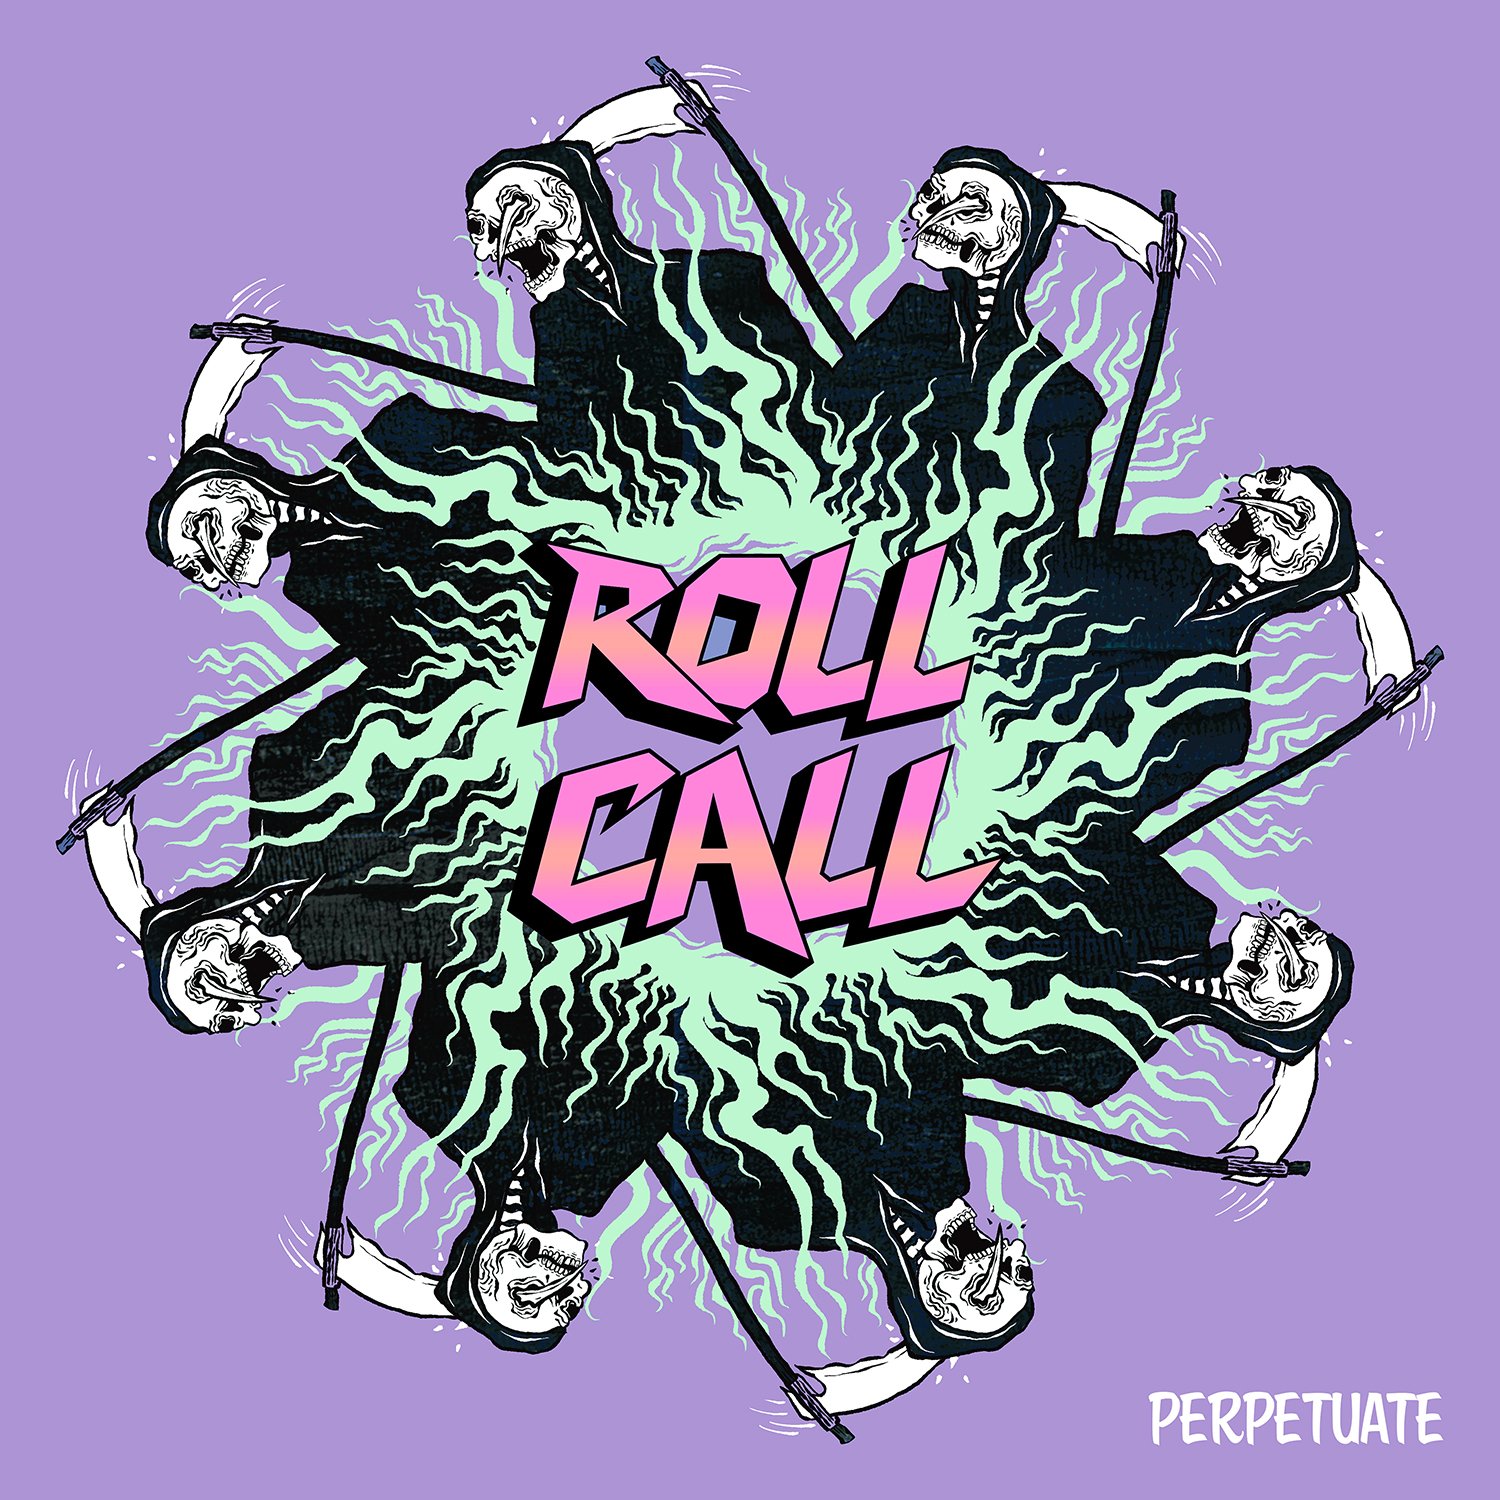 ROLL CALL "Perpetuate"